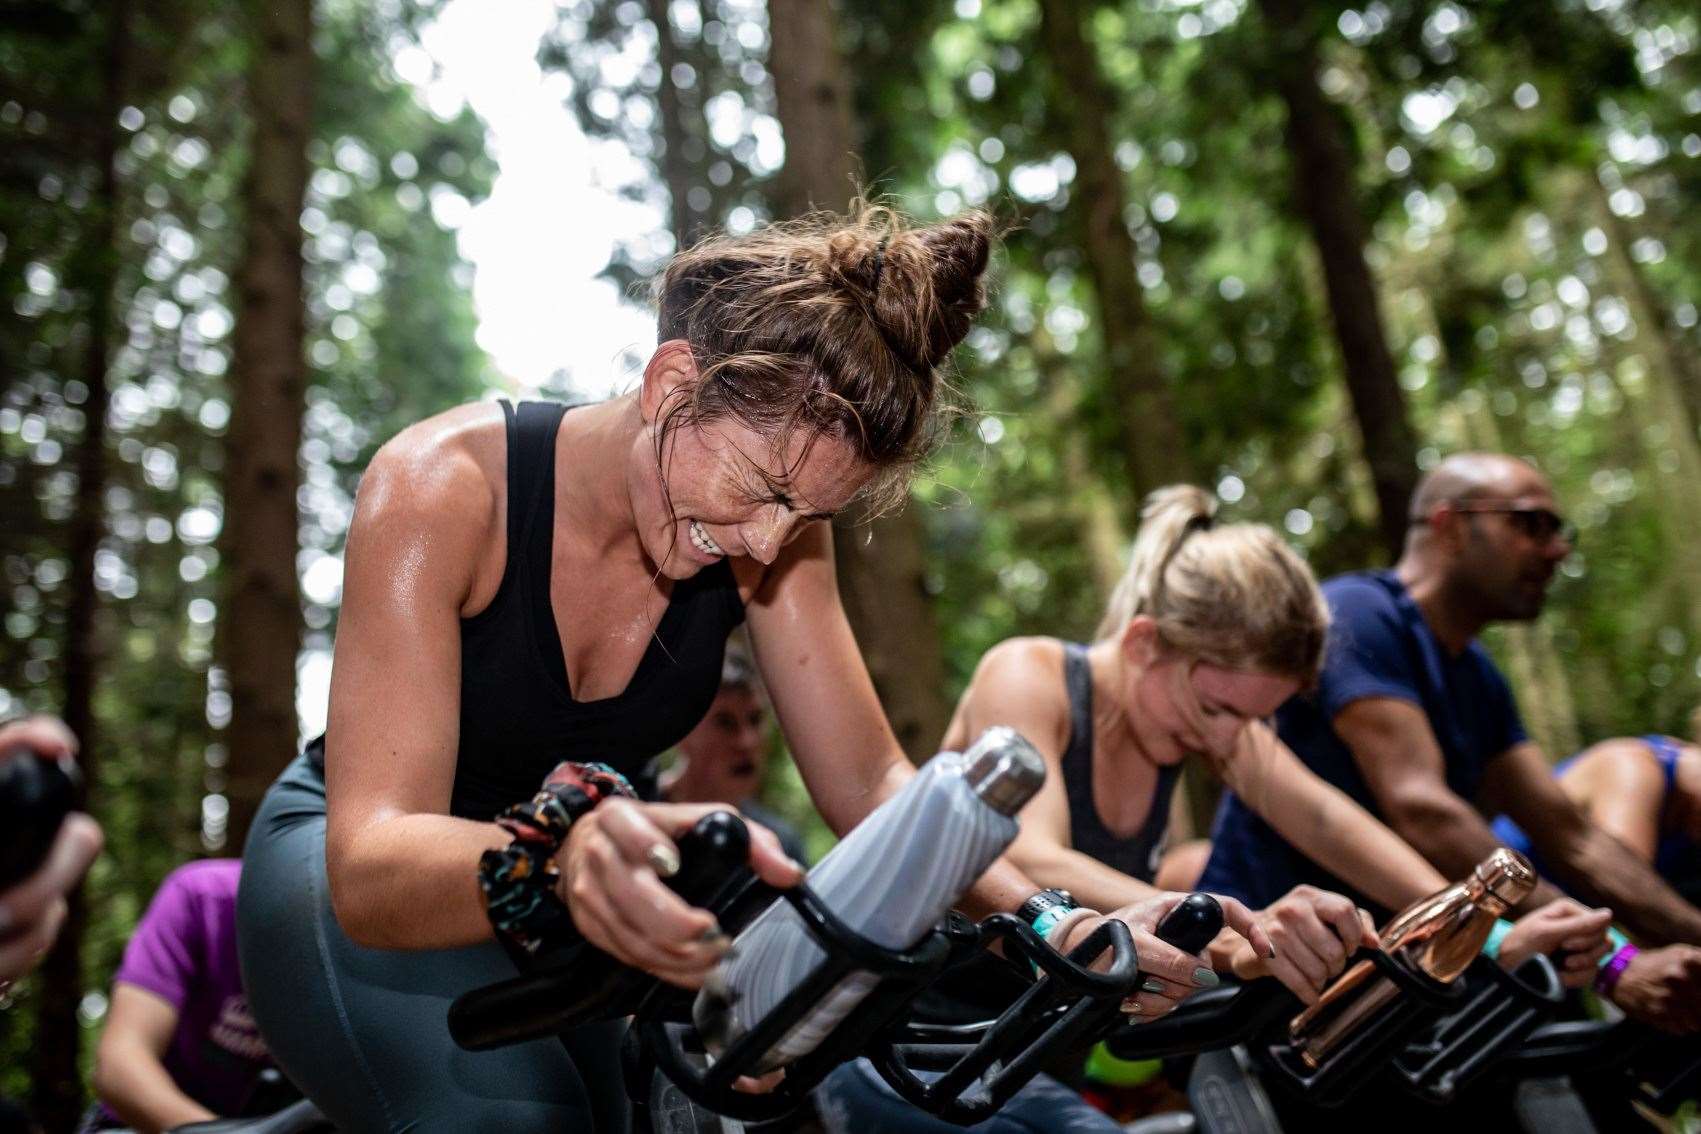 Visitors can take part in exercise classes, trail hikes and cycles, bootcamps and more. Picture: LoveFit